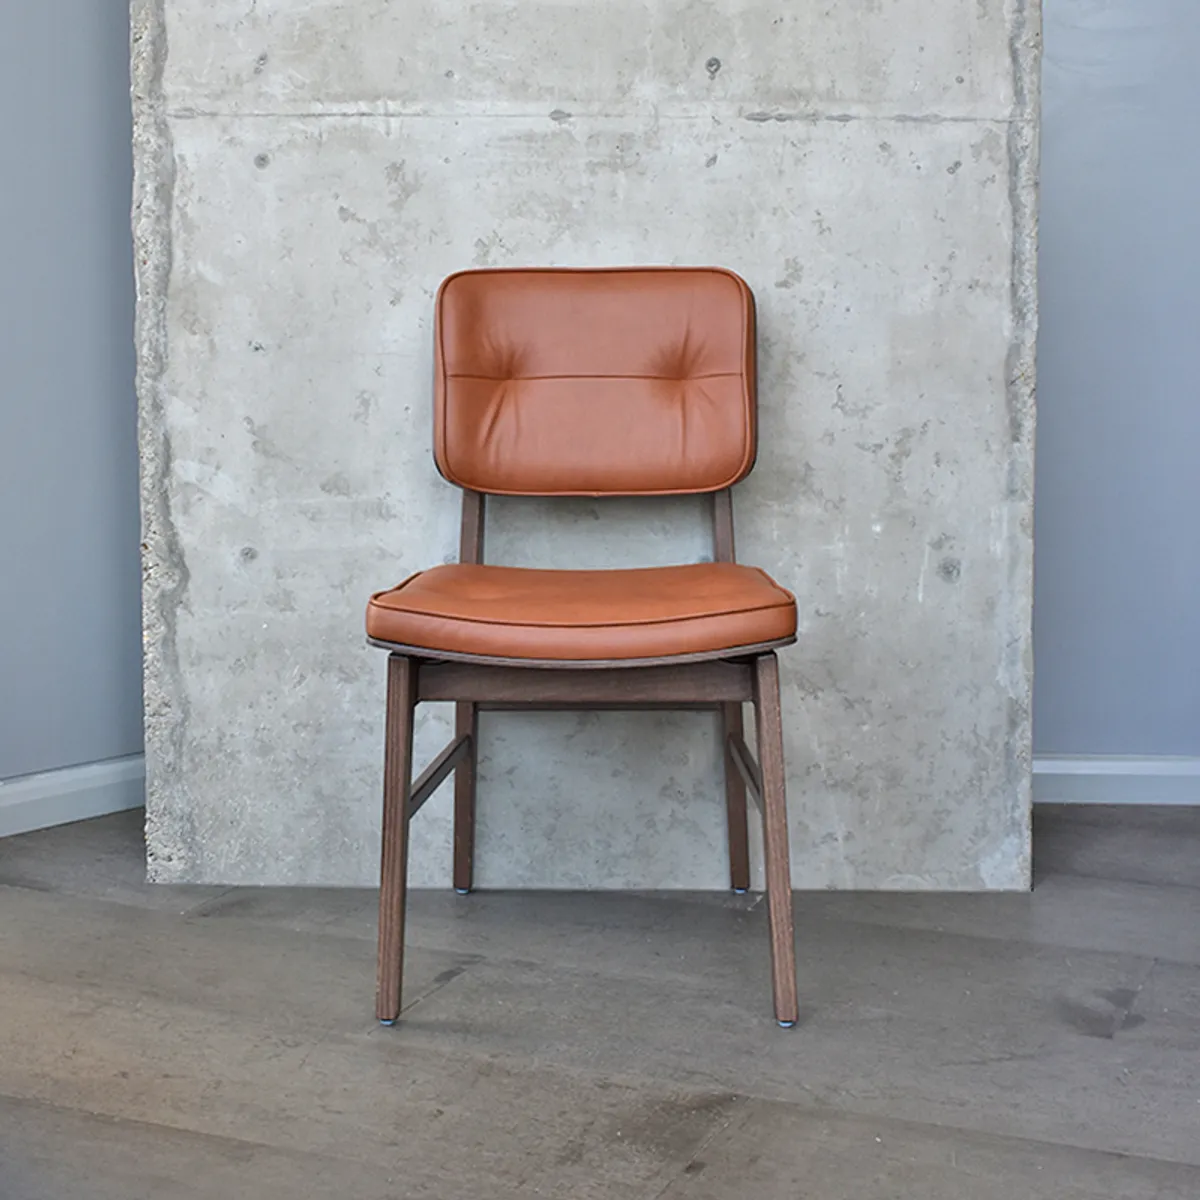 Hardwick Side Chair New Furniture From Milan 2019 By Inside Out Contracts 040